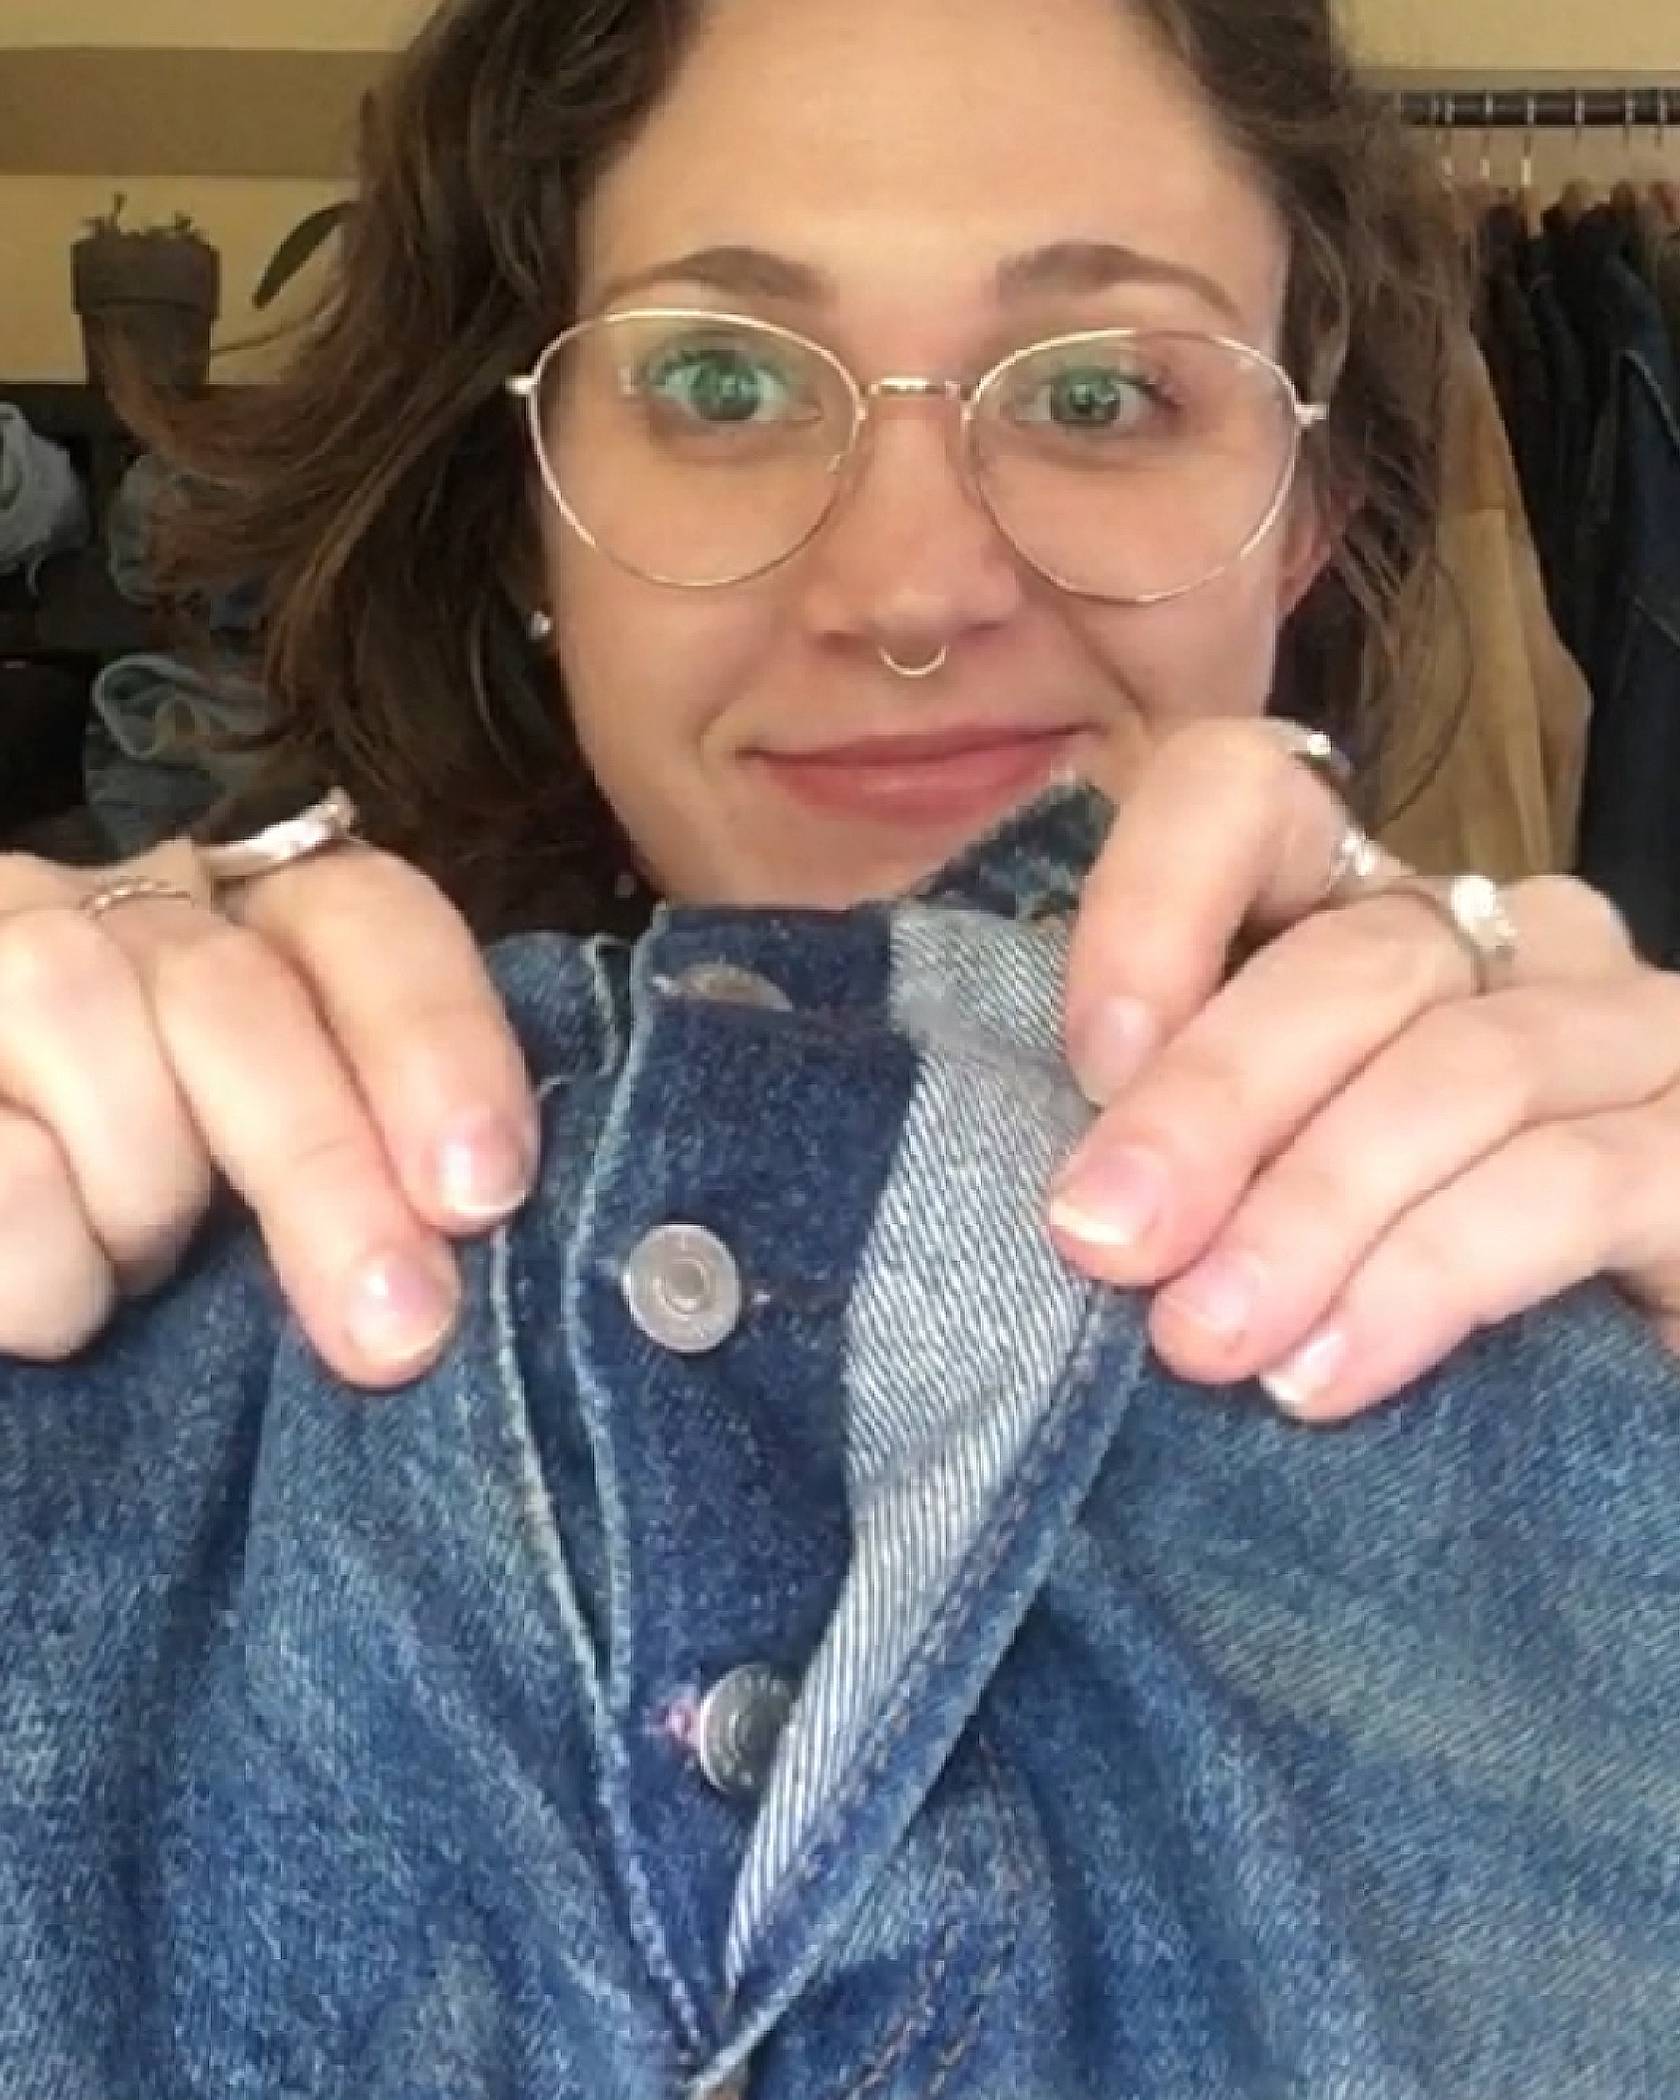 Levi's® Tailor Jen Sharkey holding up a pair of jeans, showing the repaired buttonhole on the button fly of a pair of jeans.